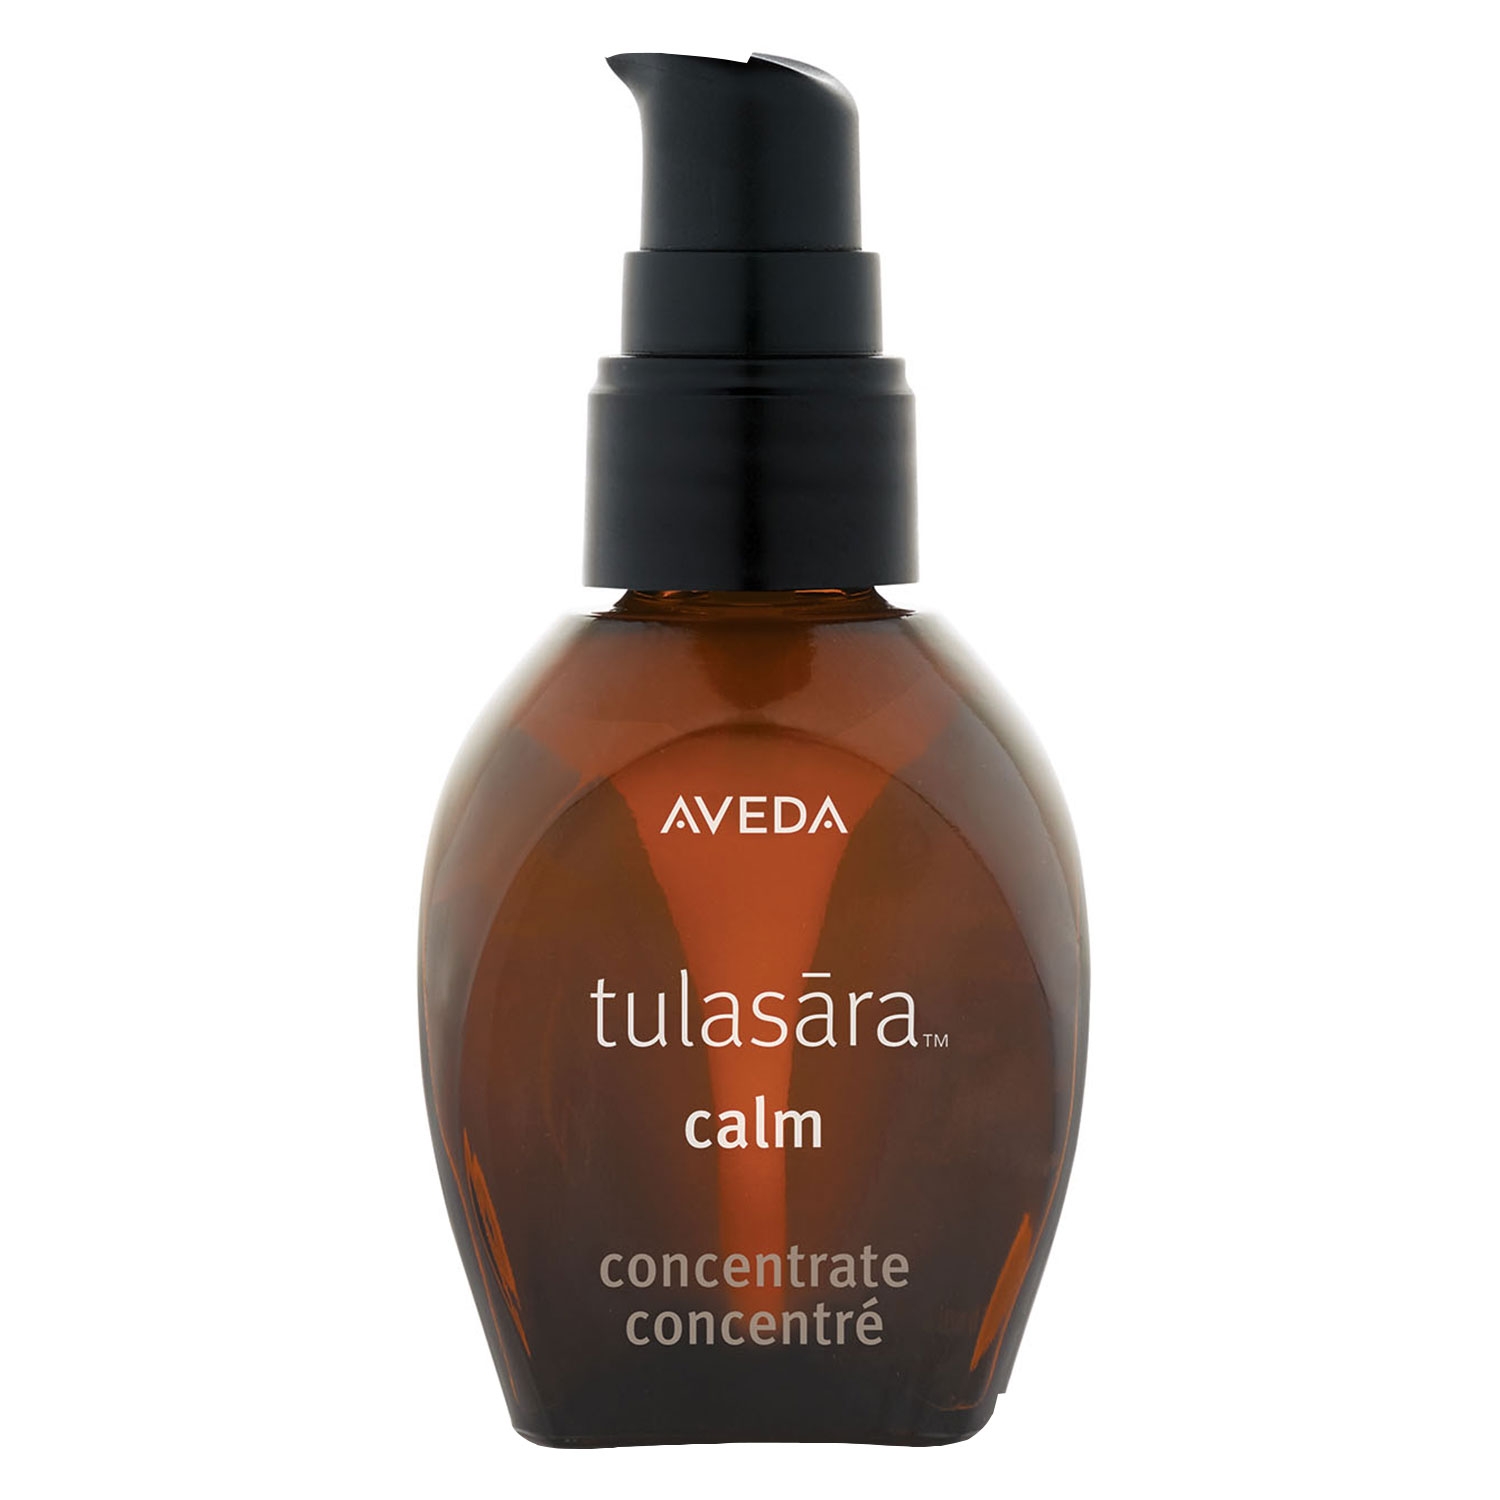 Product image from tulasara - calm concentrate